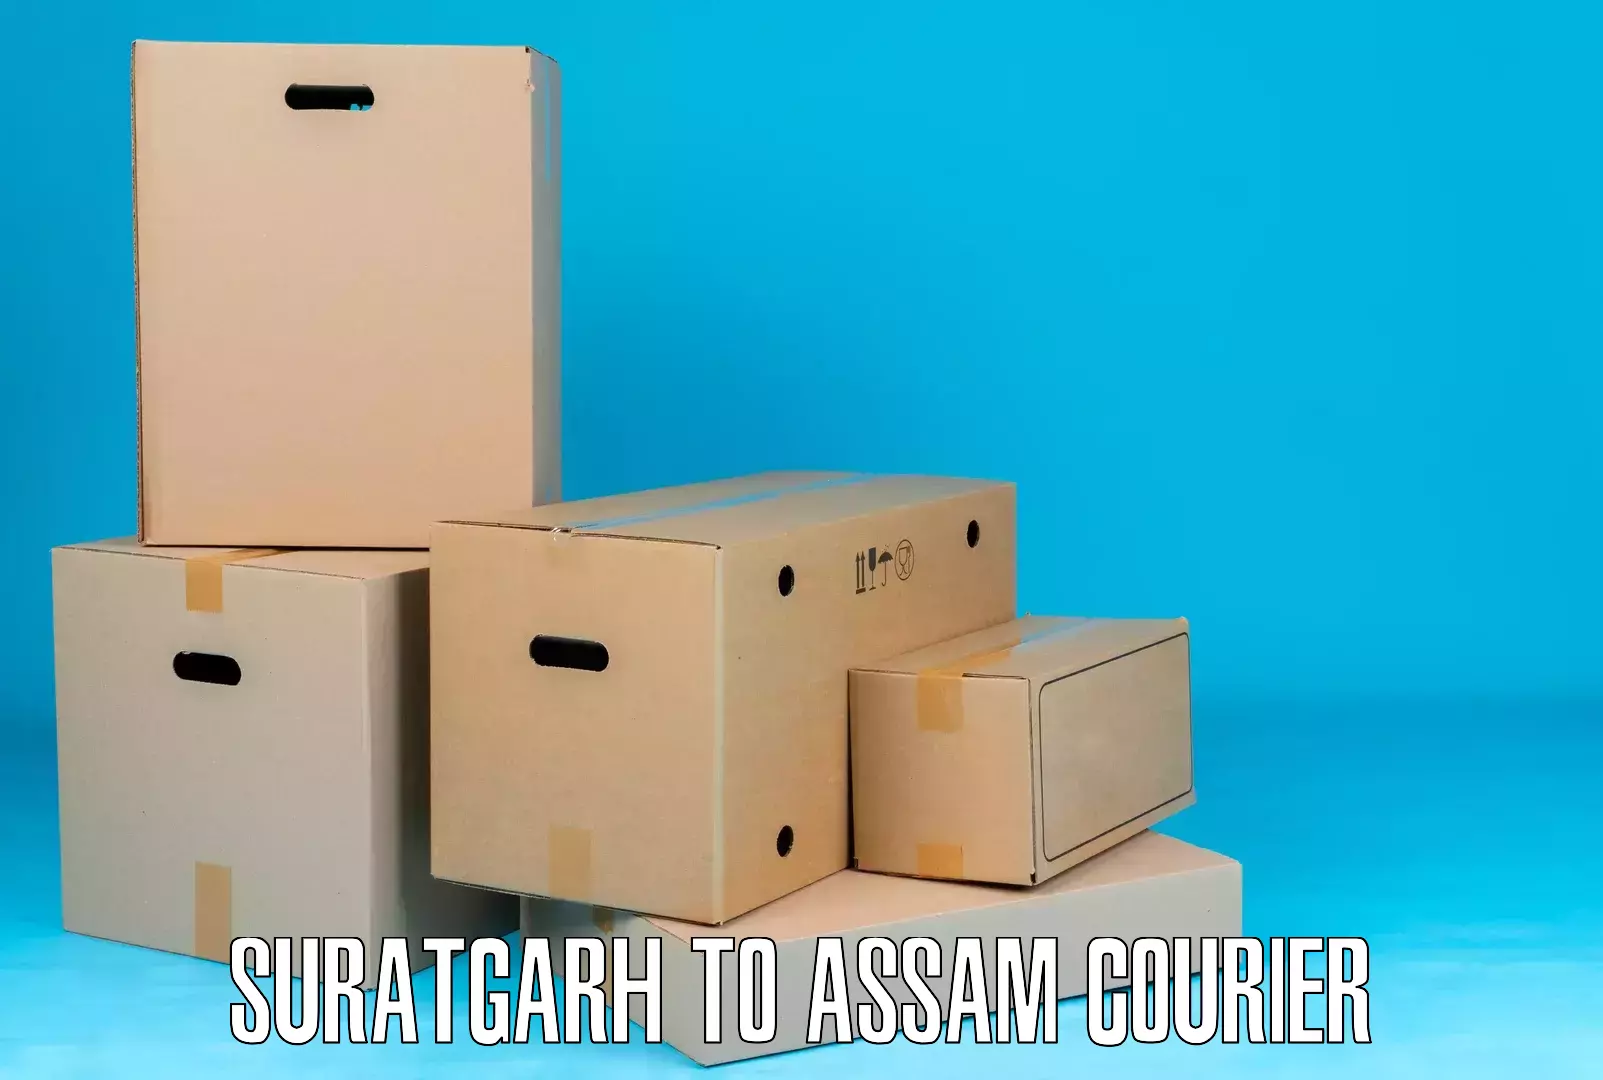 State-of-the-art courier technology Suratgarh to Sarupathar